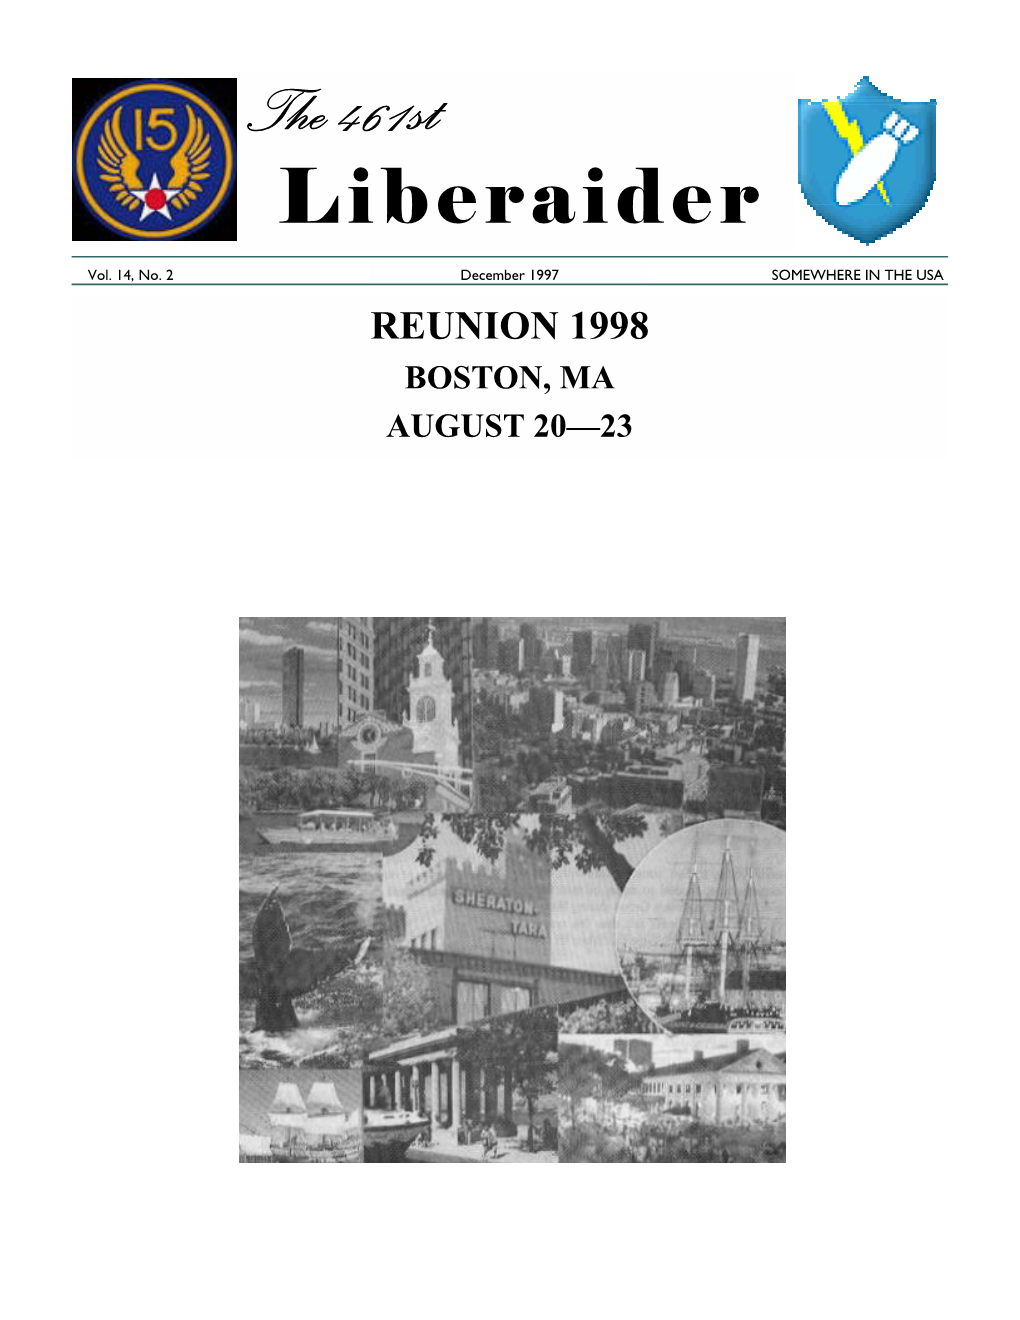 December 1997 SOMEWHERE in the USA REUNION 1998 BOSTON, MA AUGUST 20—23 PAGE 2 the 461ST LIBERAIDER DECEMBER 1997